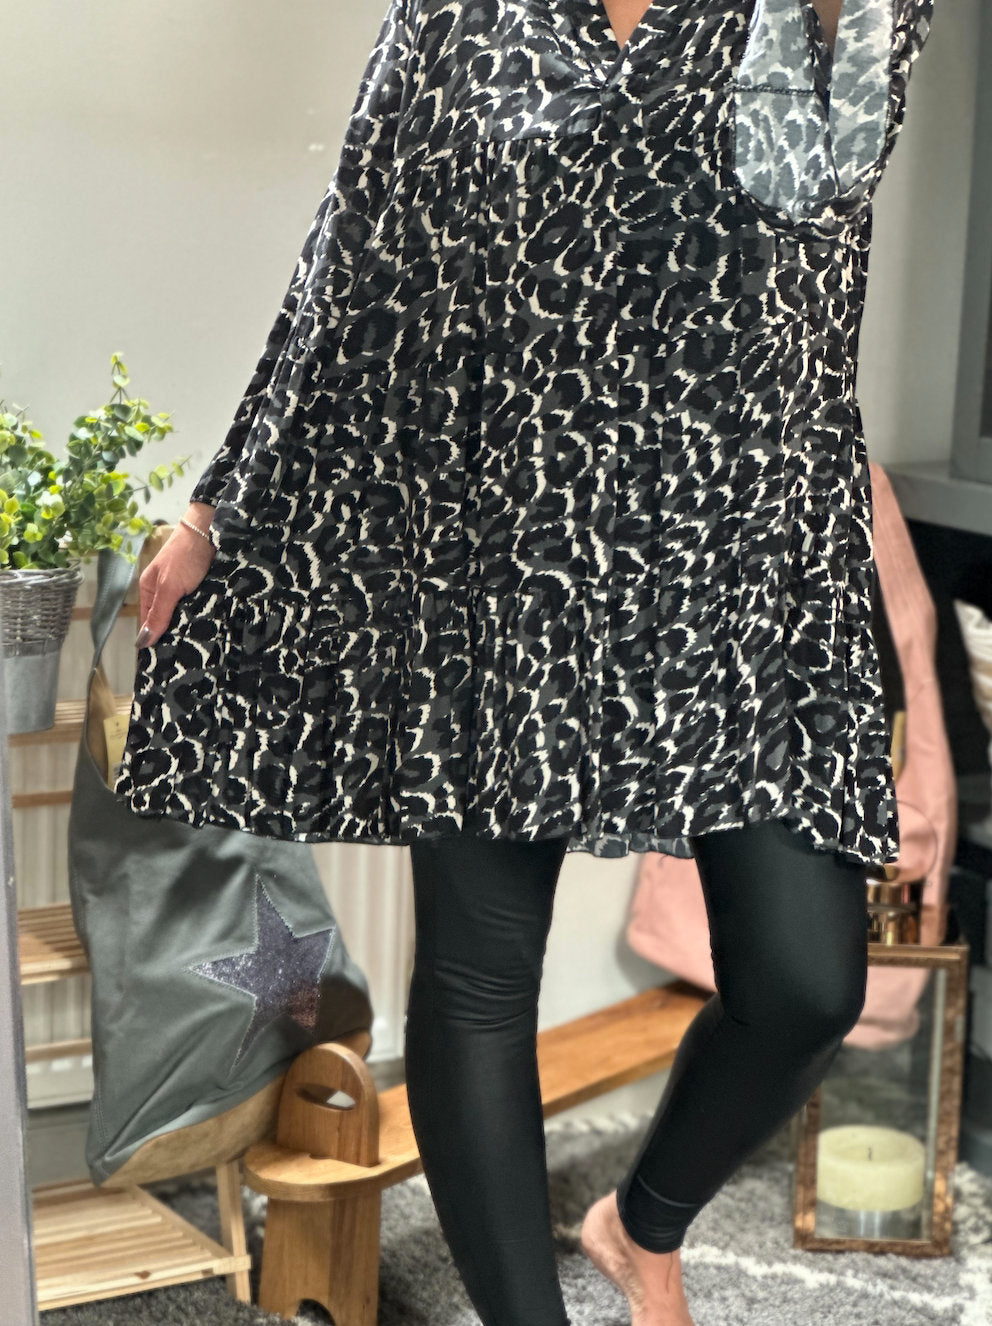 Made in Italy Black Animal Print Smock Dress, Shirt, Tiered Dress